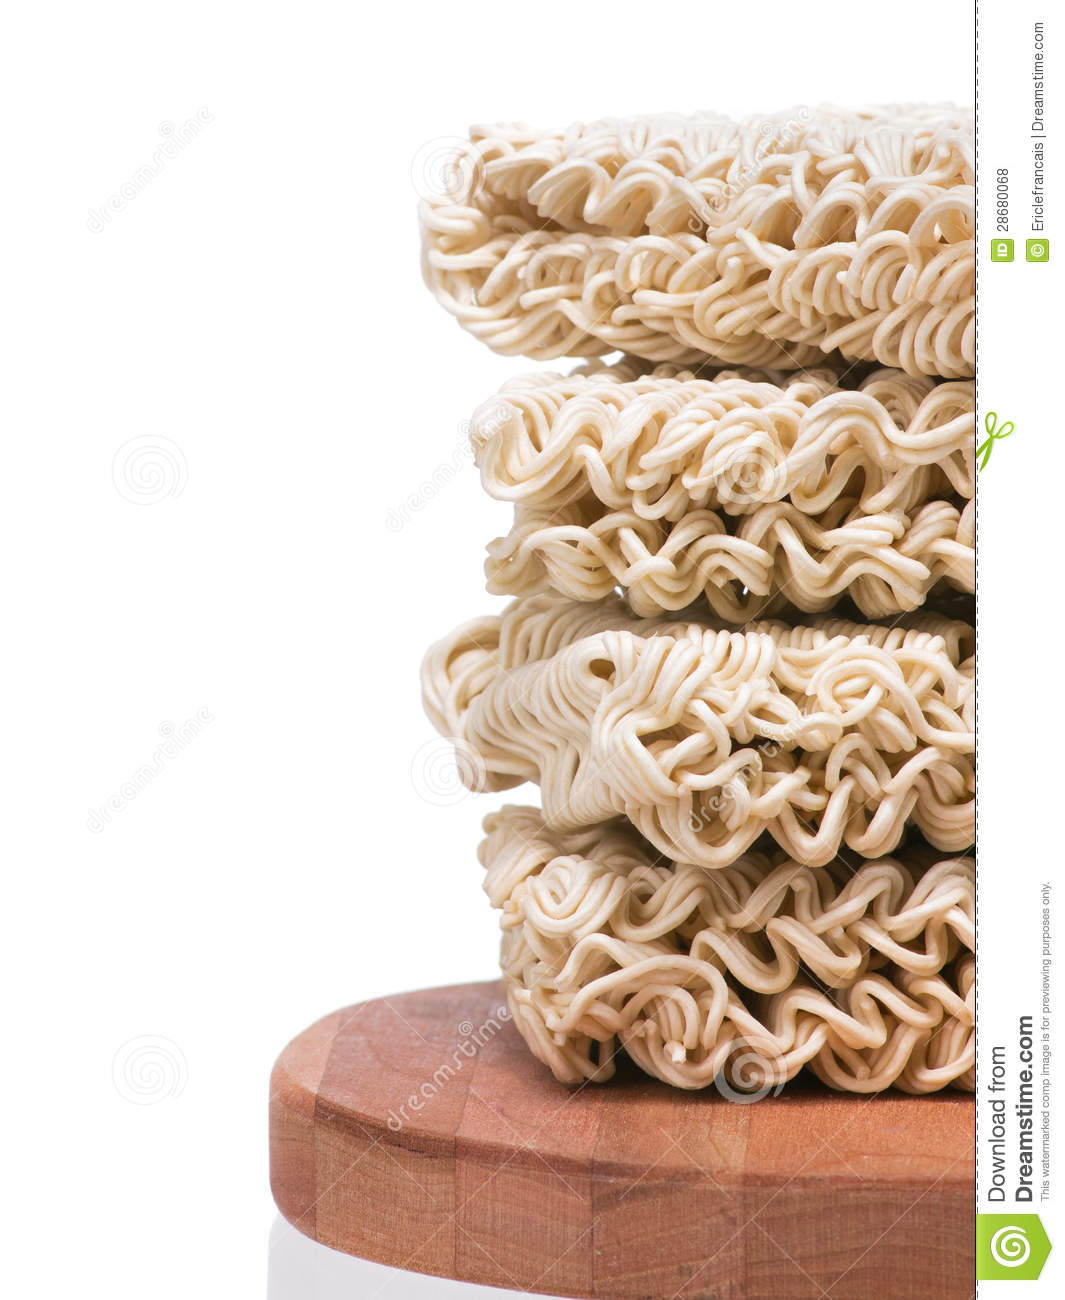 Ramen Instant Raw Noodles Staked On Wooden Plank Royalty Free Stock